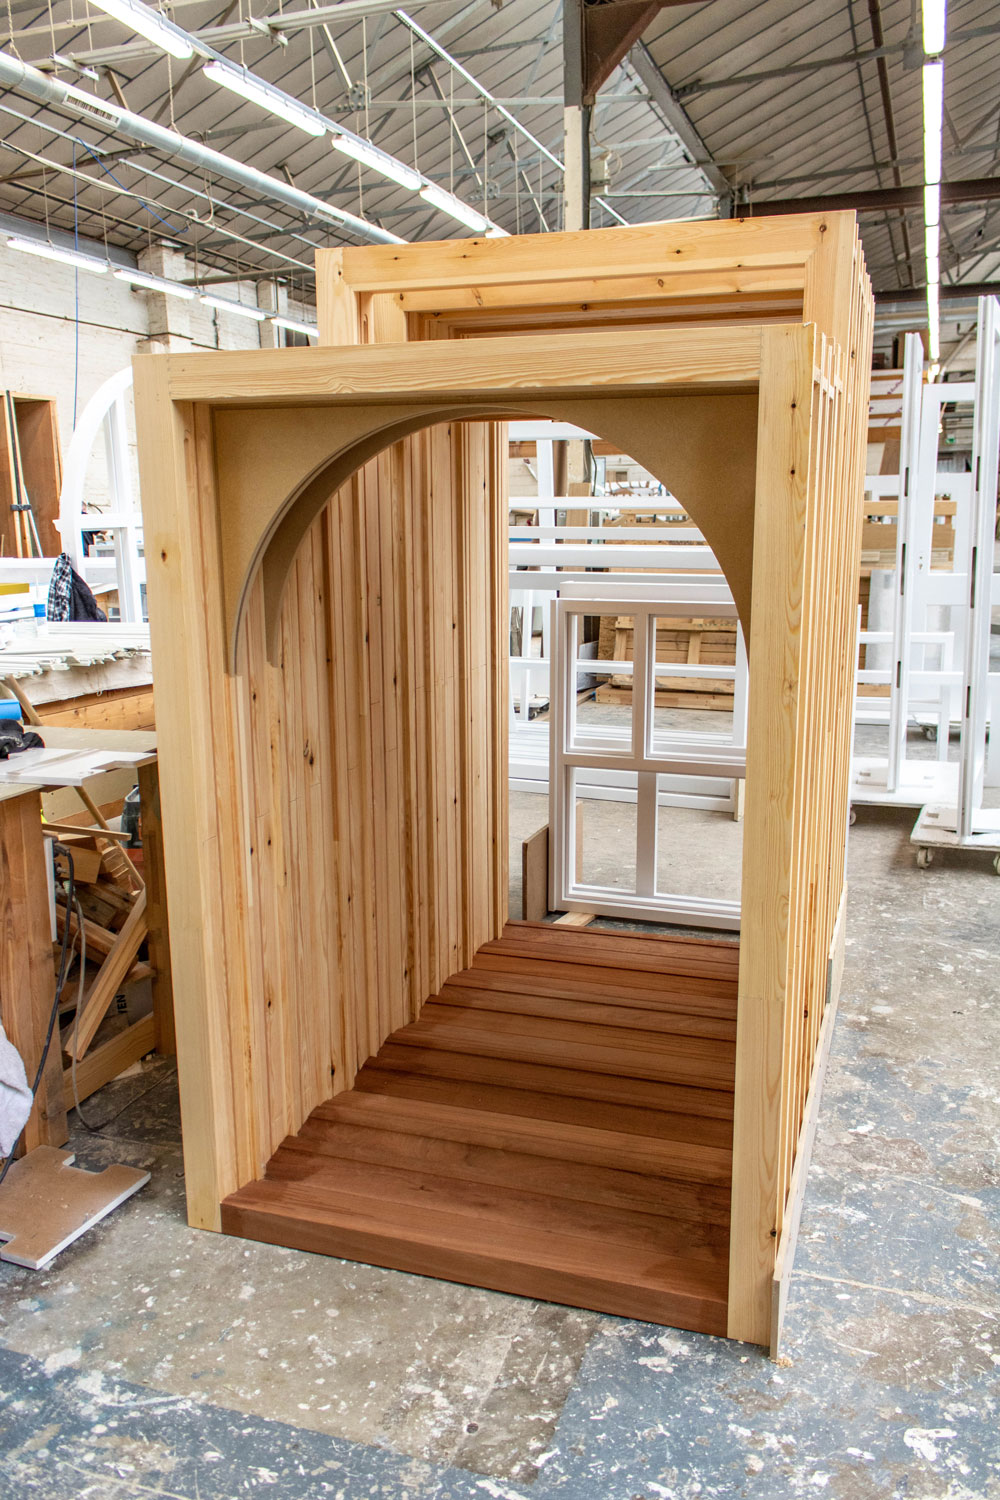 wooden arch window frame construction in k&d joinery workshop